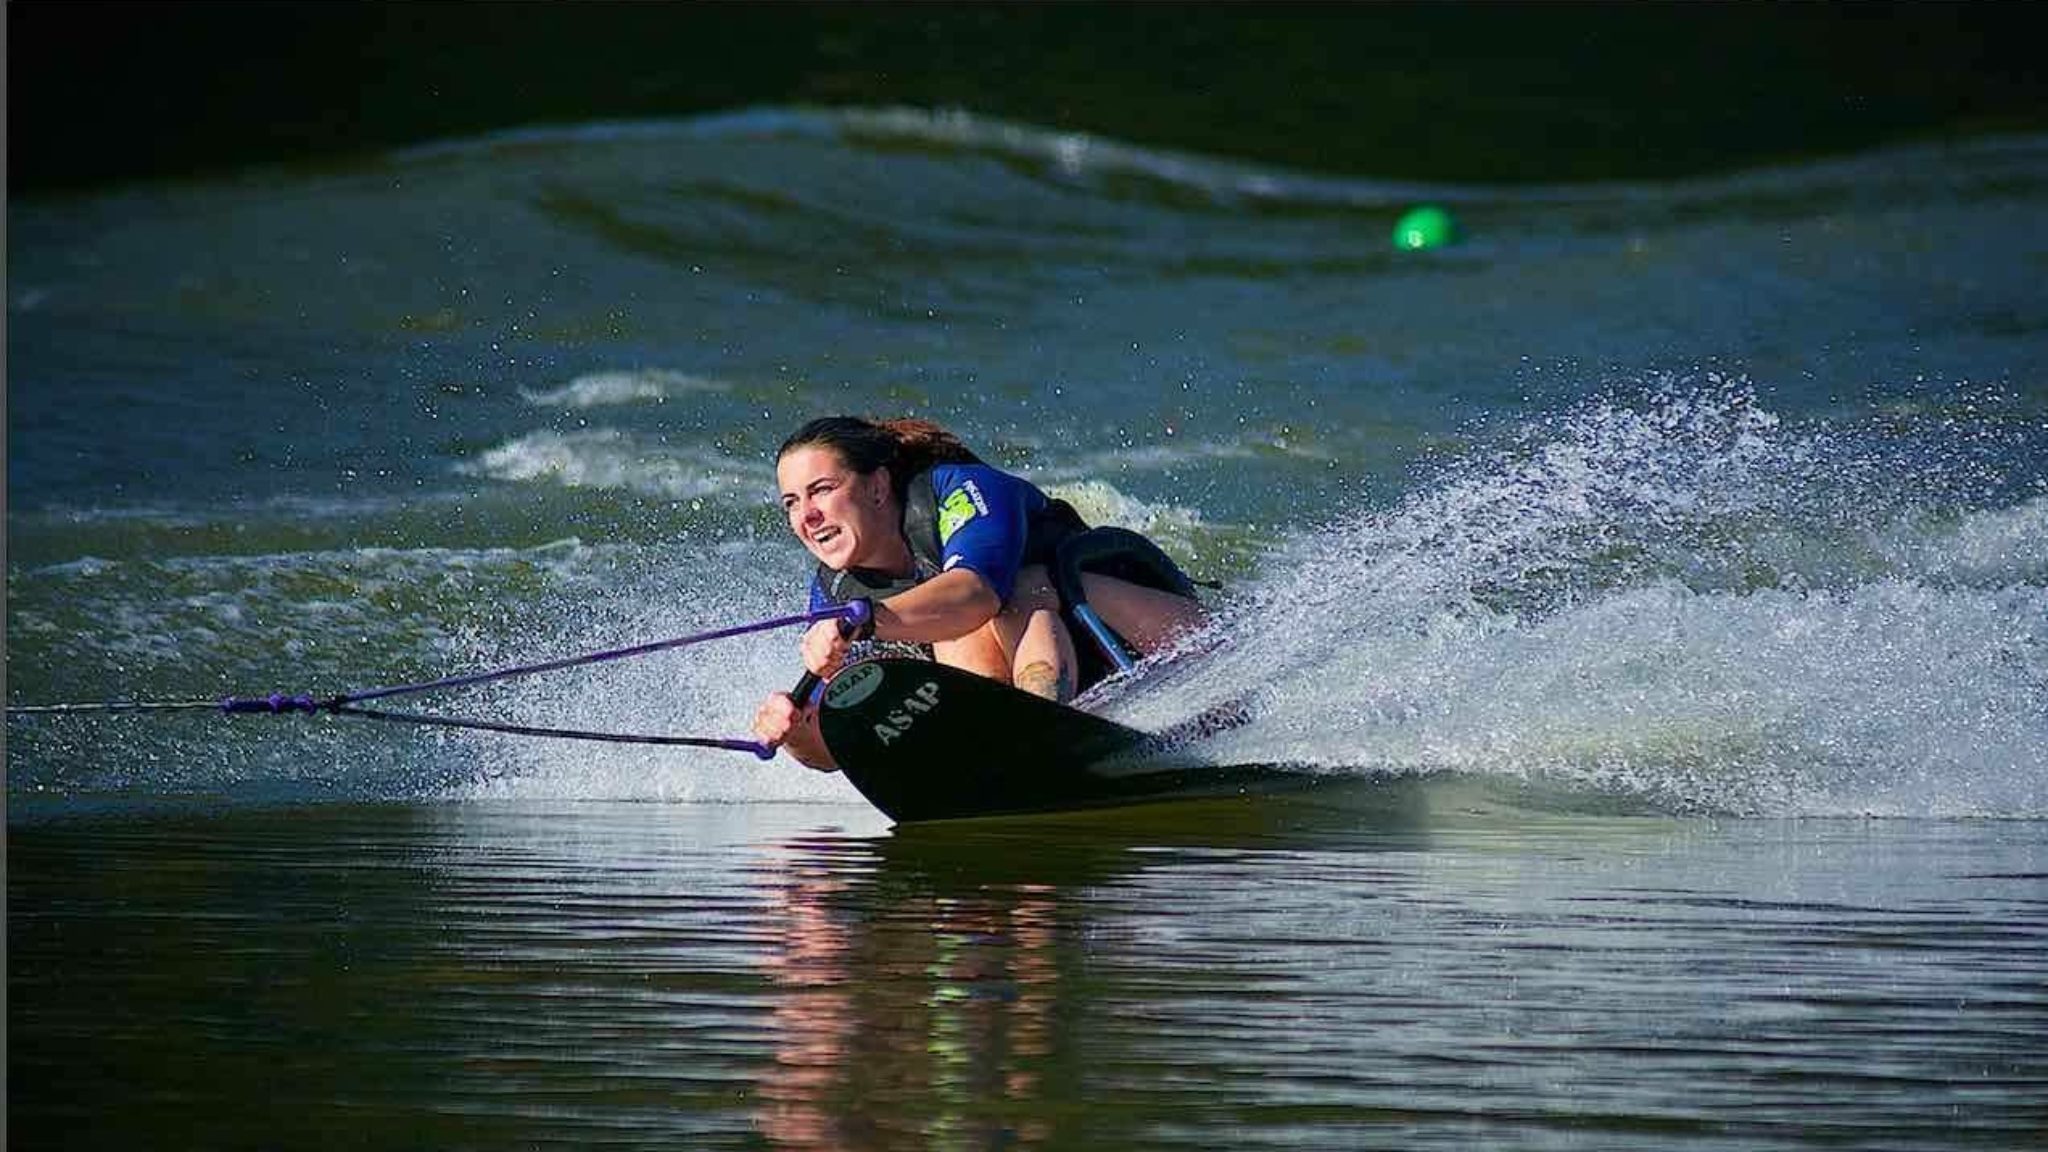 Jesi Stracham participates in an adaptive water skiing competition in Harmony, NC., in October. John Lipscomb, STAT